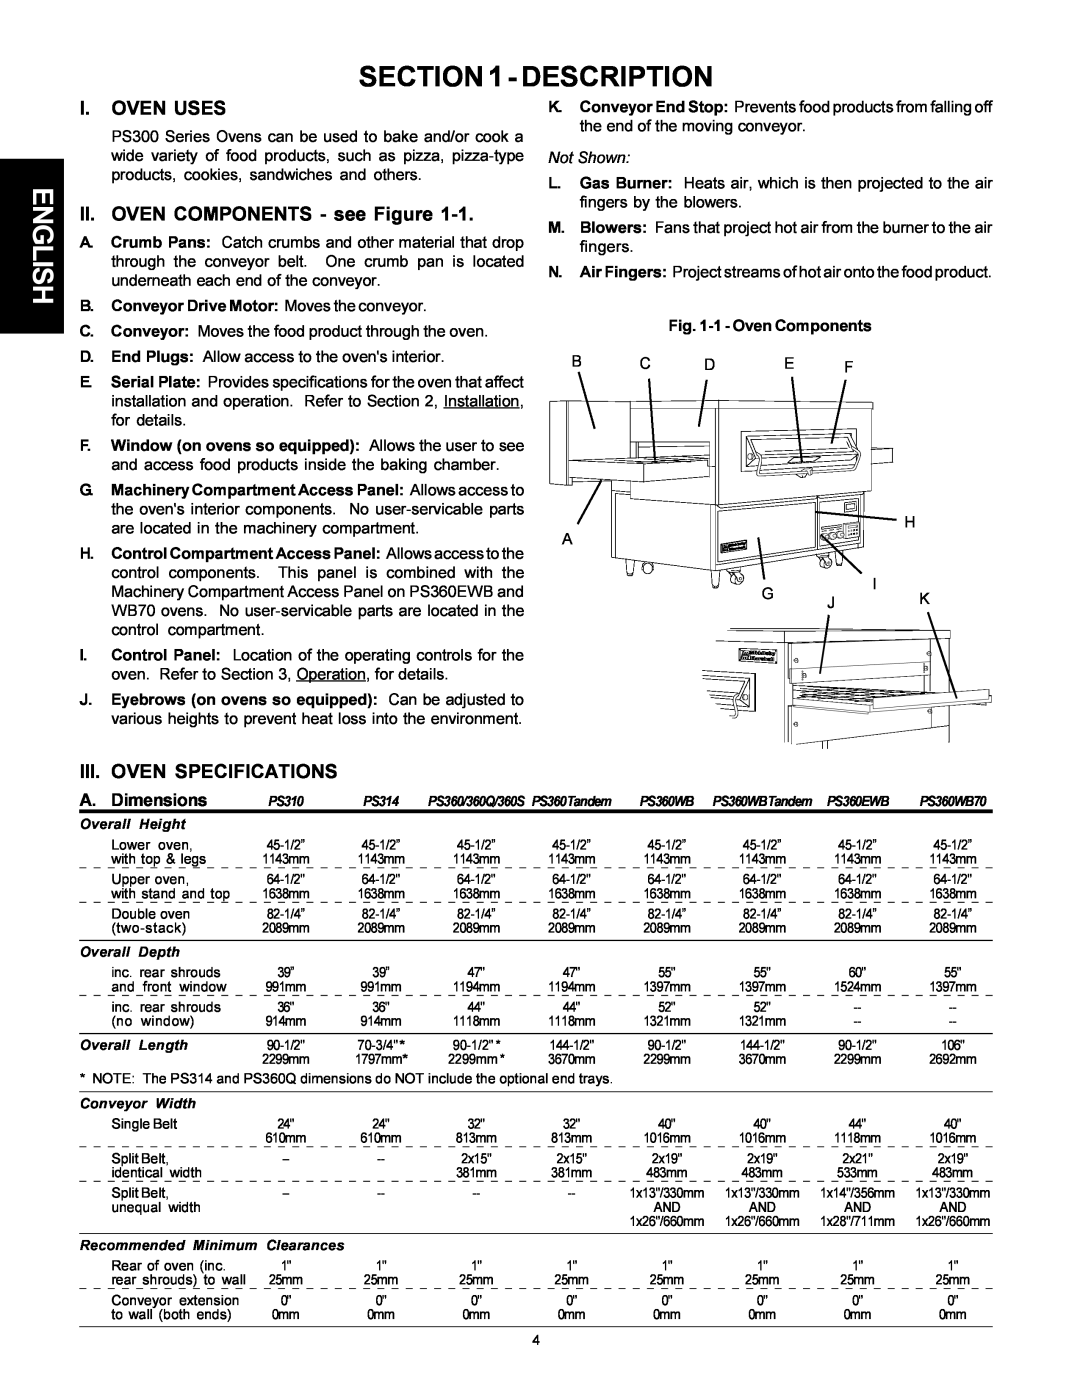 Middleby Marshall PS310, PS360WB Description, English, I. Oven Uses, II. OVEN COMPONENTS - see Figure, Oven Specifications 